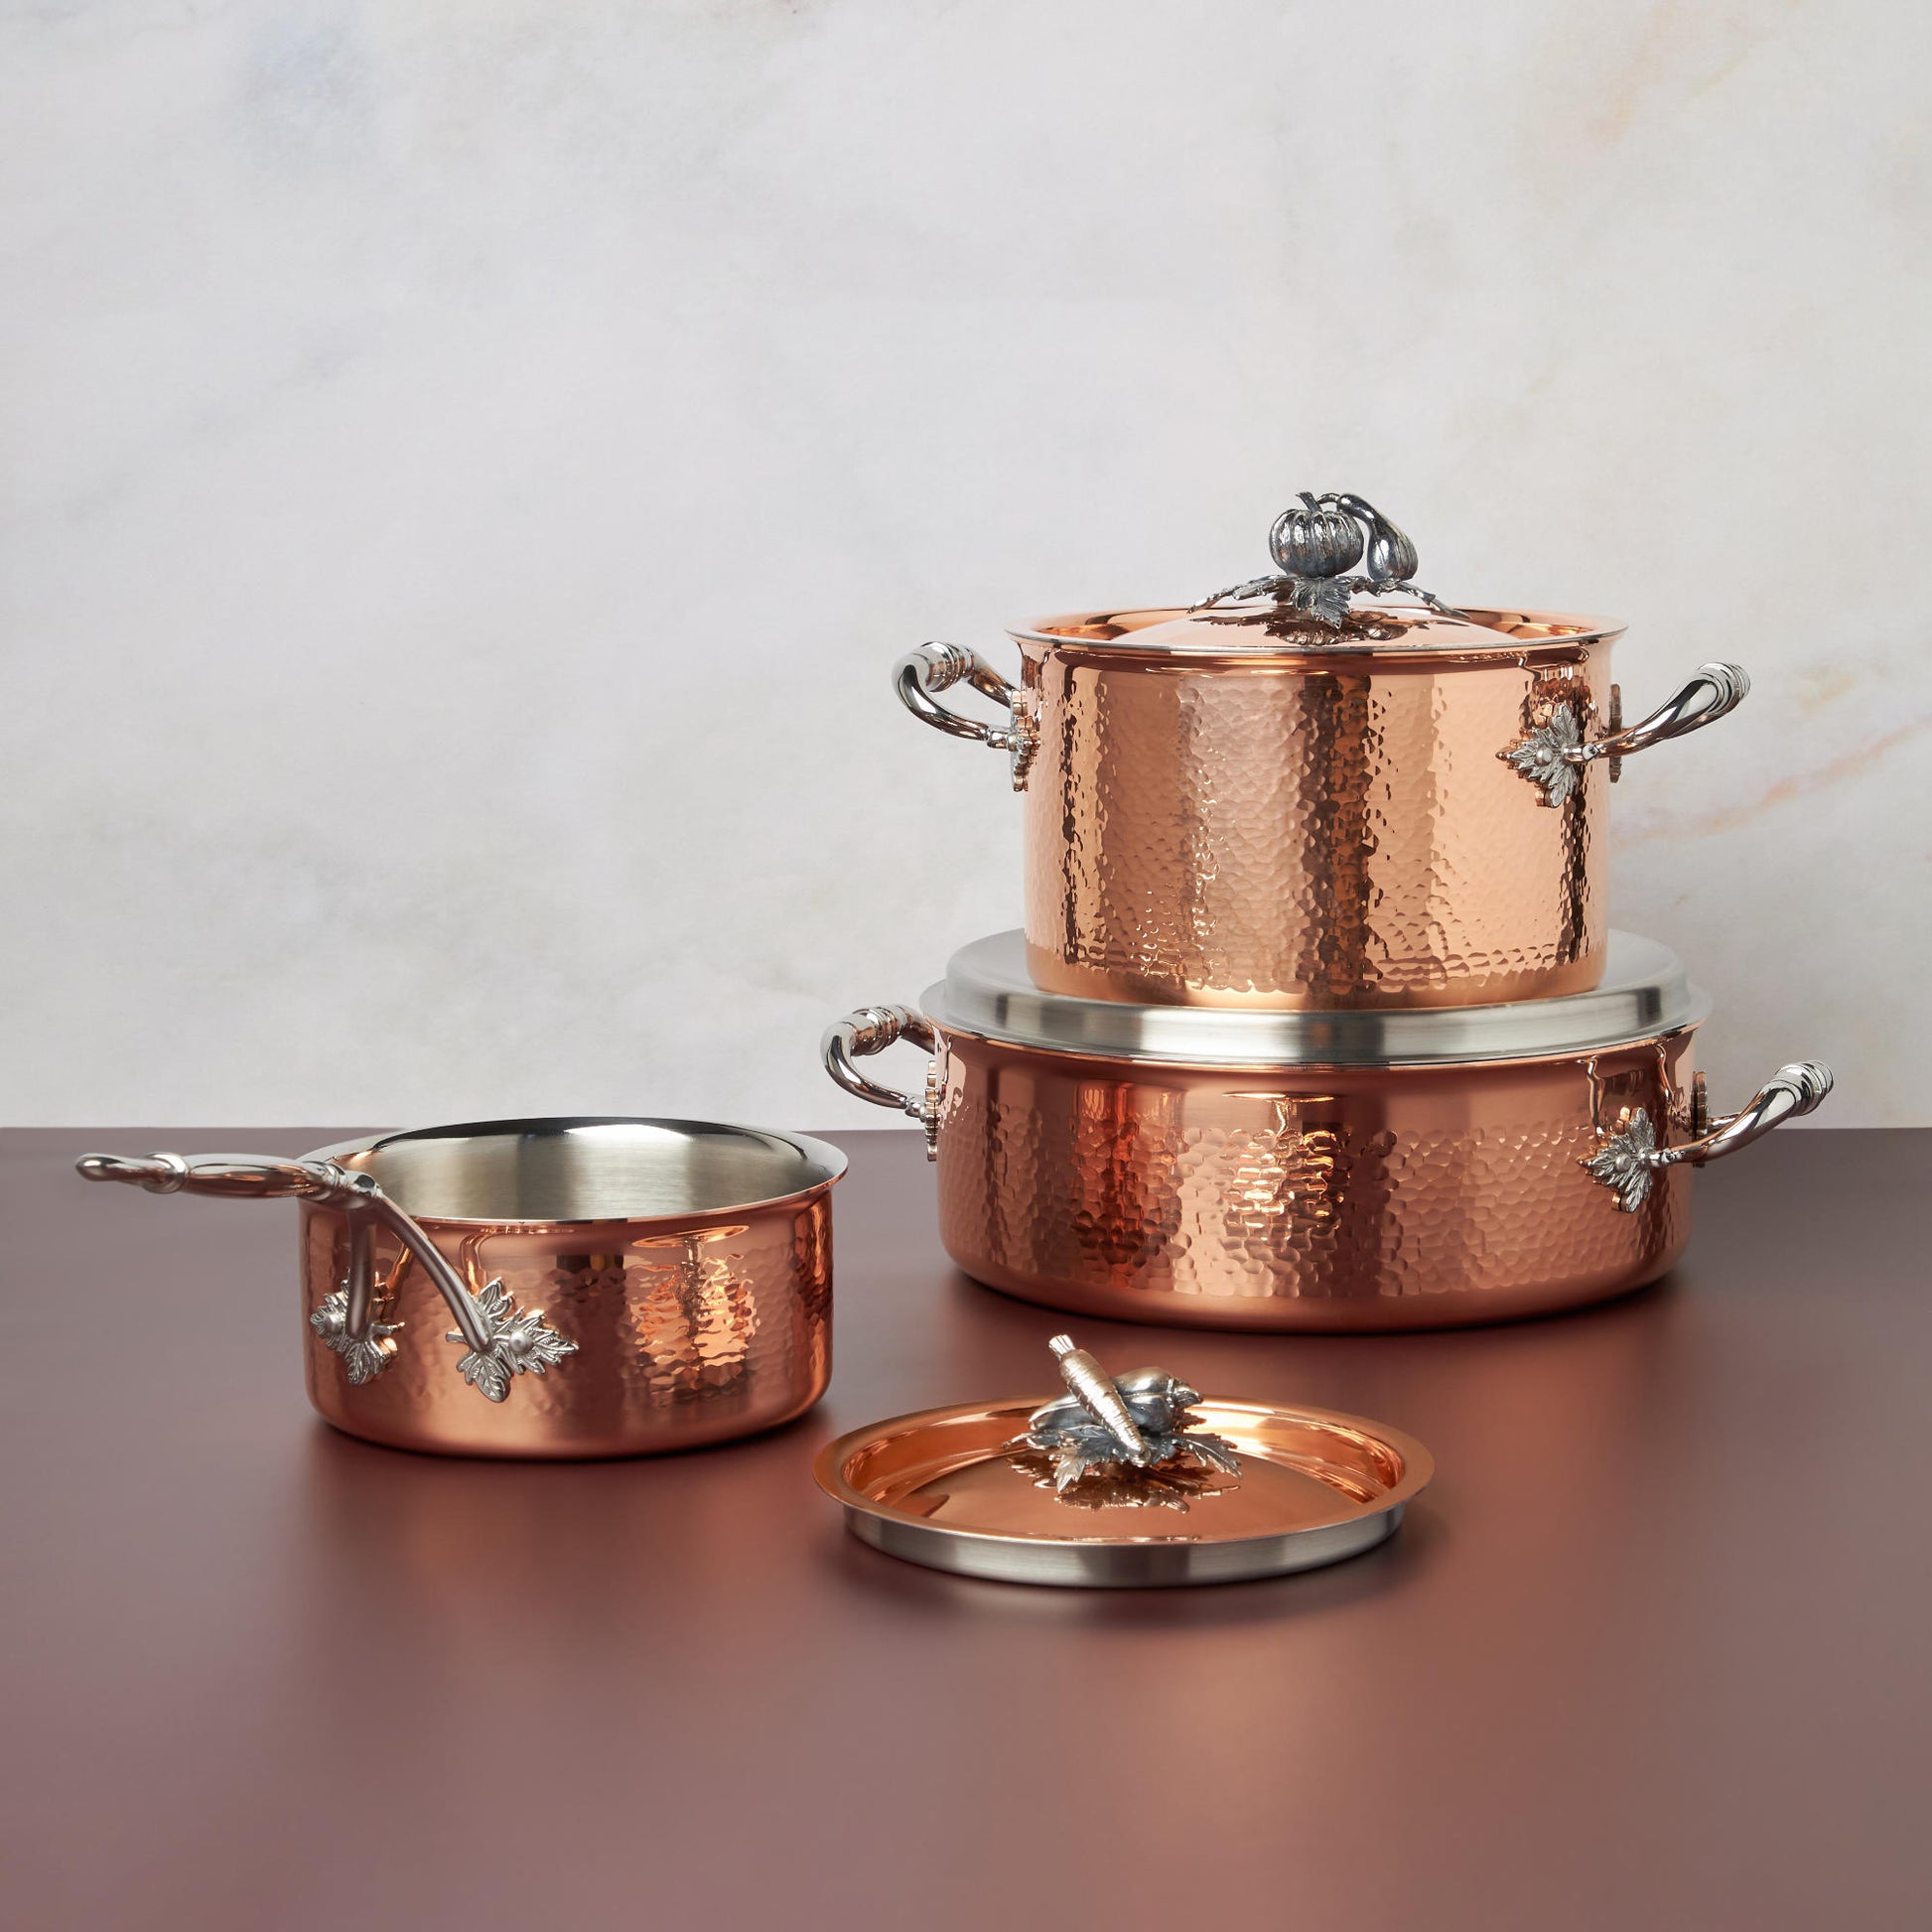 6 piece set Opus Cupra hammered copper  with stainless steel lining and decorated silver-plated lid knob finial from Ruffoni